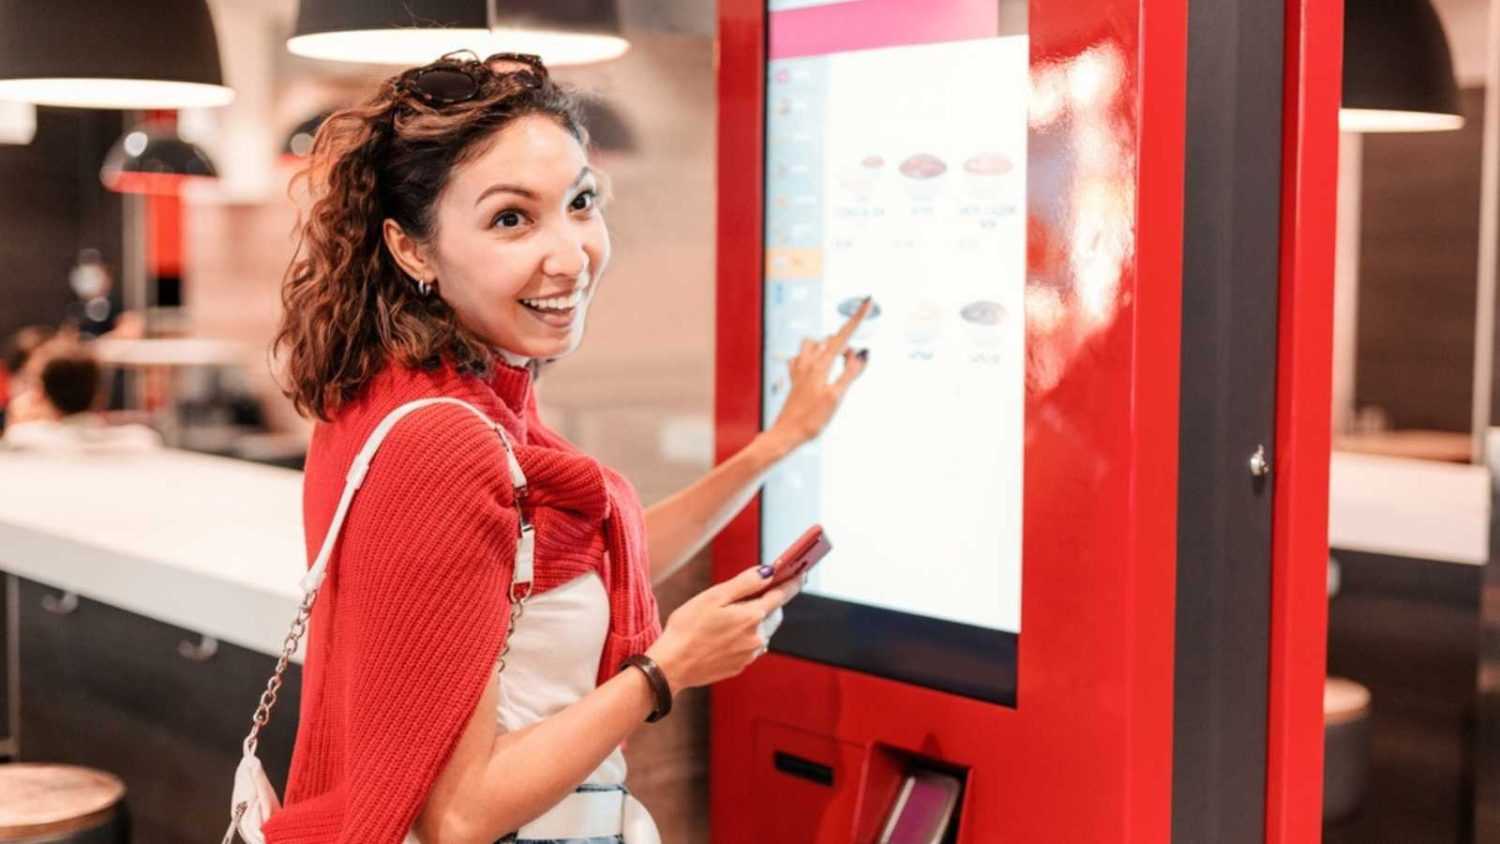 A girl orders food and lunch at a fast food restaurant using a self-service kiosk or a terminal with a screen. Modern commerce equipment